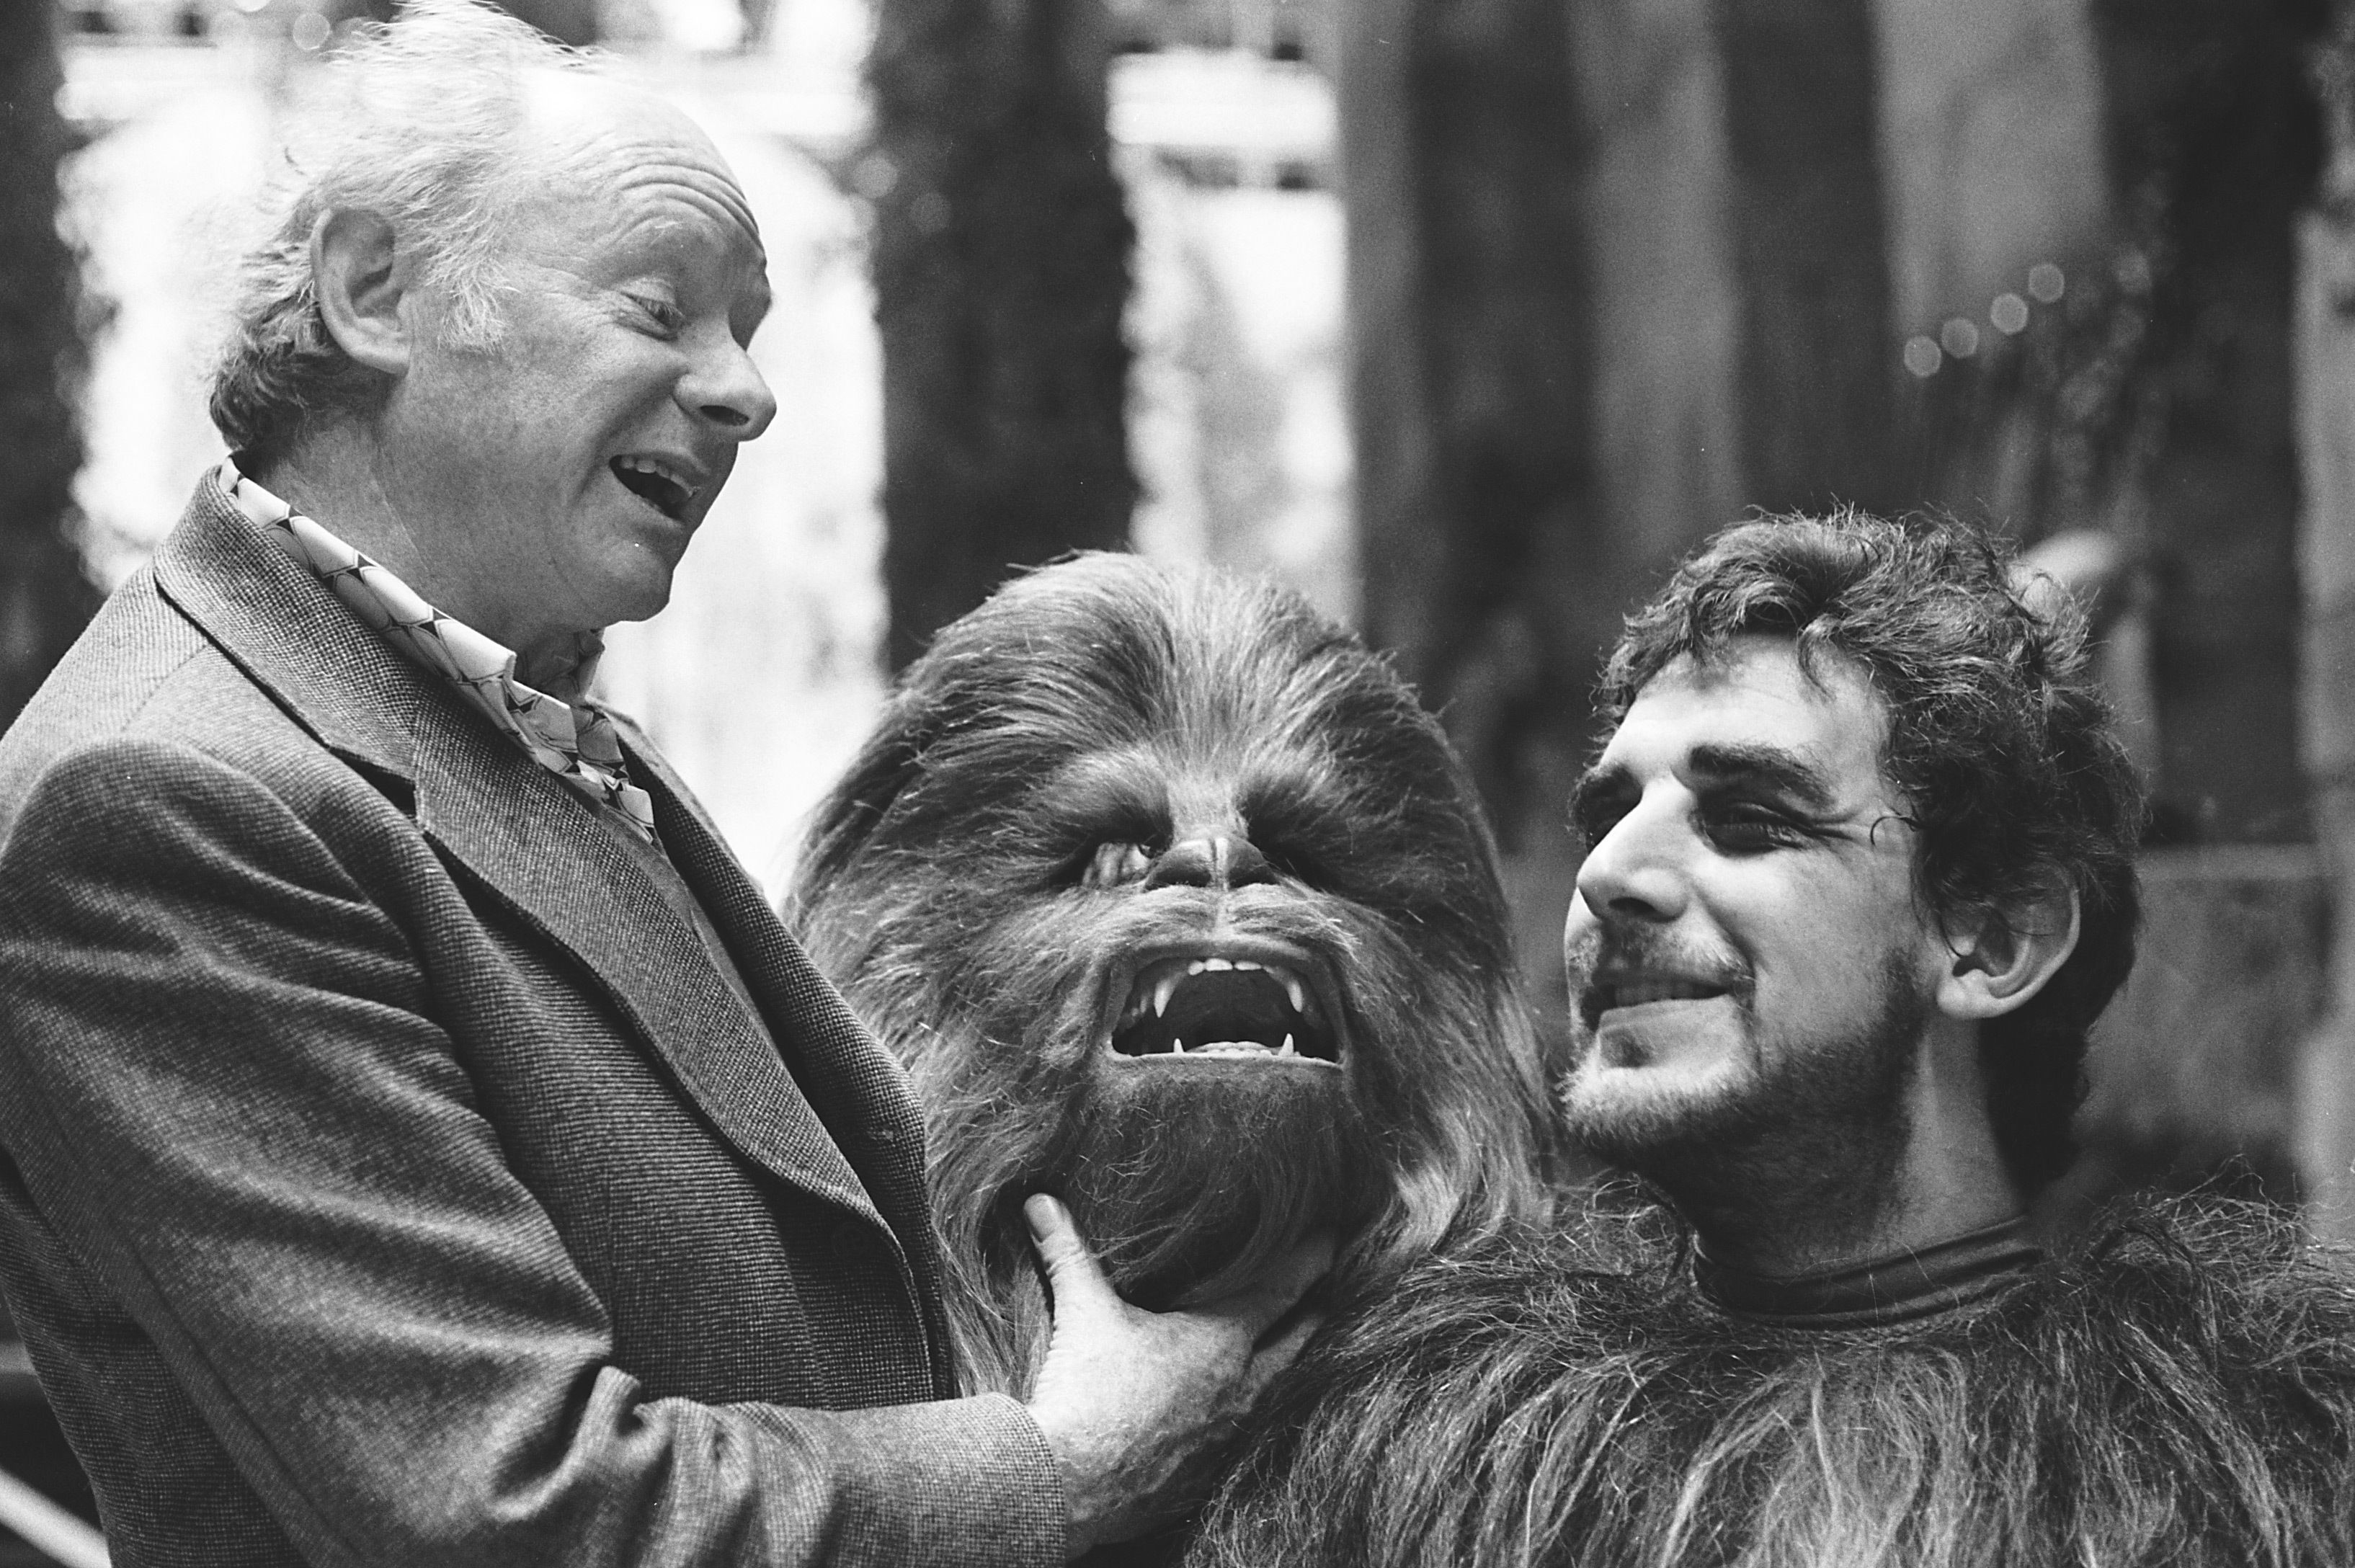 Makeup artist Stuart Freeborn and Peter Mayhew rehearse Chewbacca’s lines